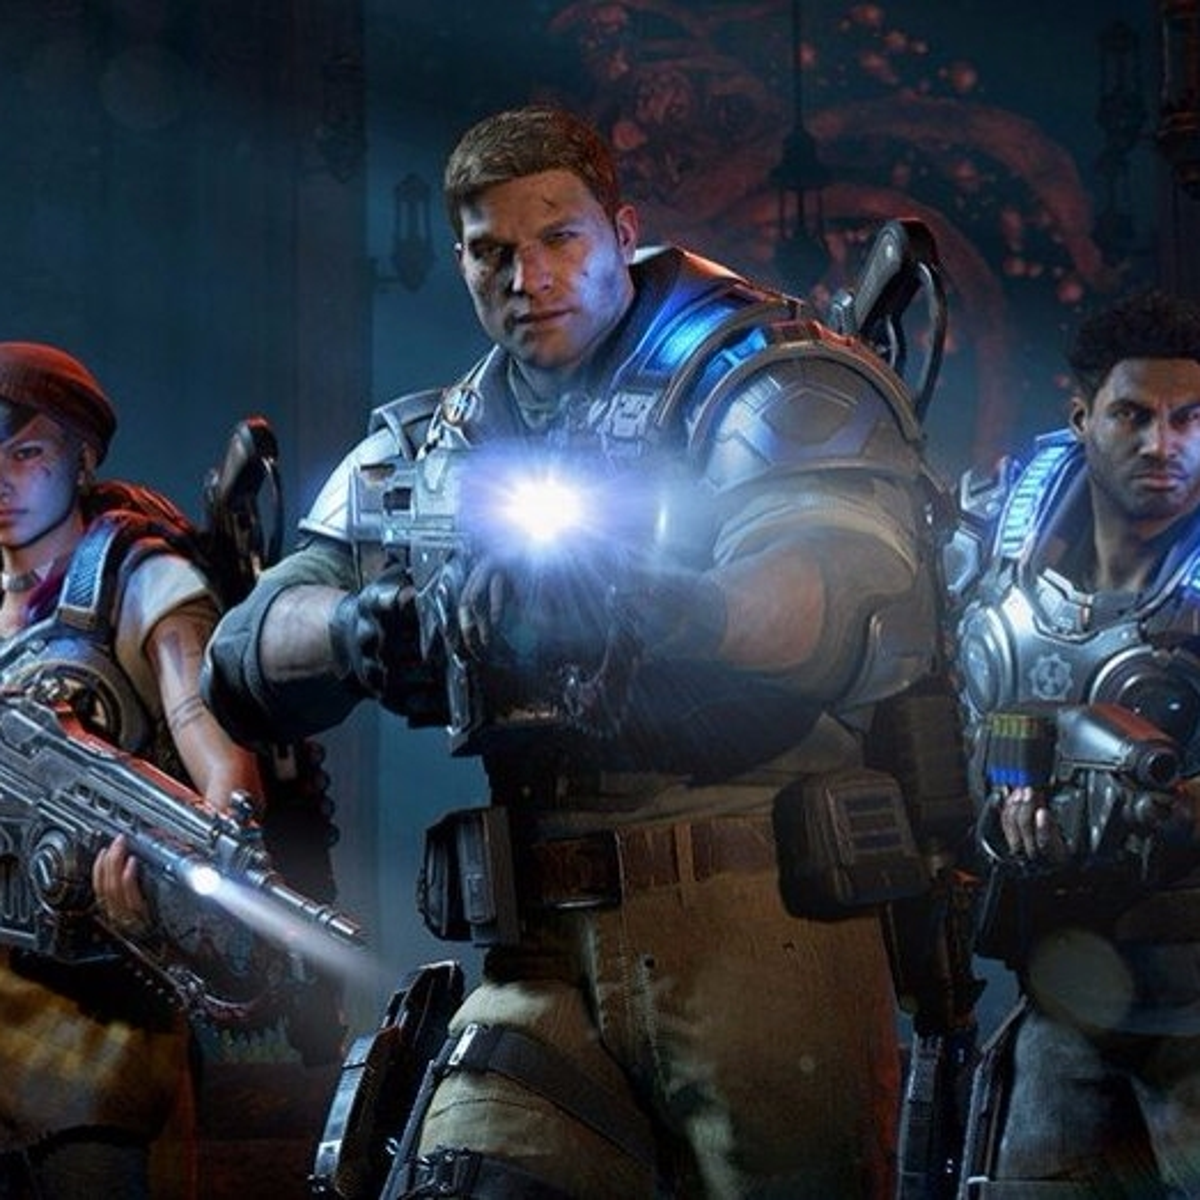 Digital Foundry: Hands-on with Gears of War 4's multiplayer beta